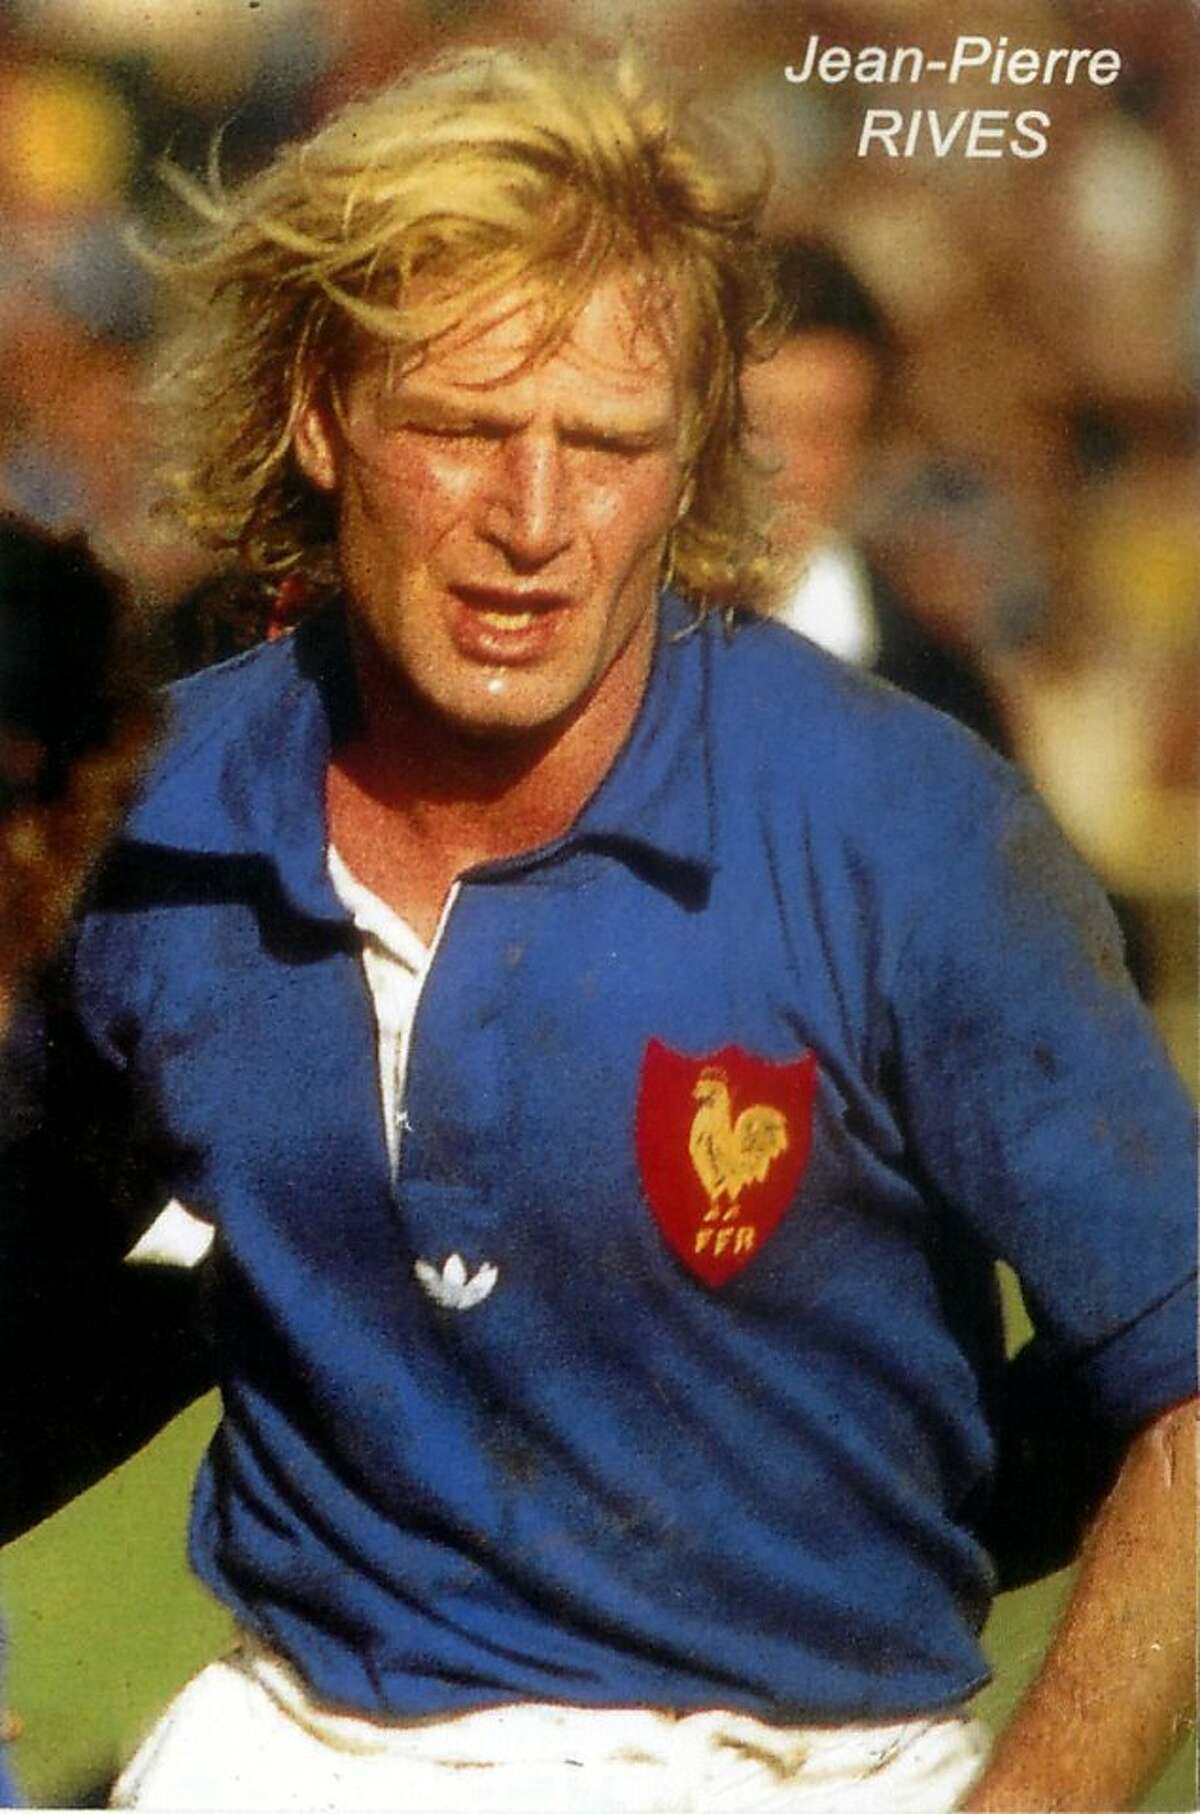 Photo of Jean-Pierre Rives when he played rugby from 1974 - 1984. Courtesy Jean-Pierre Rives